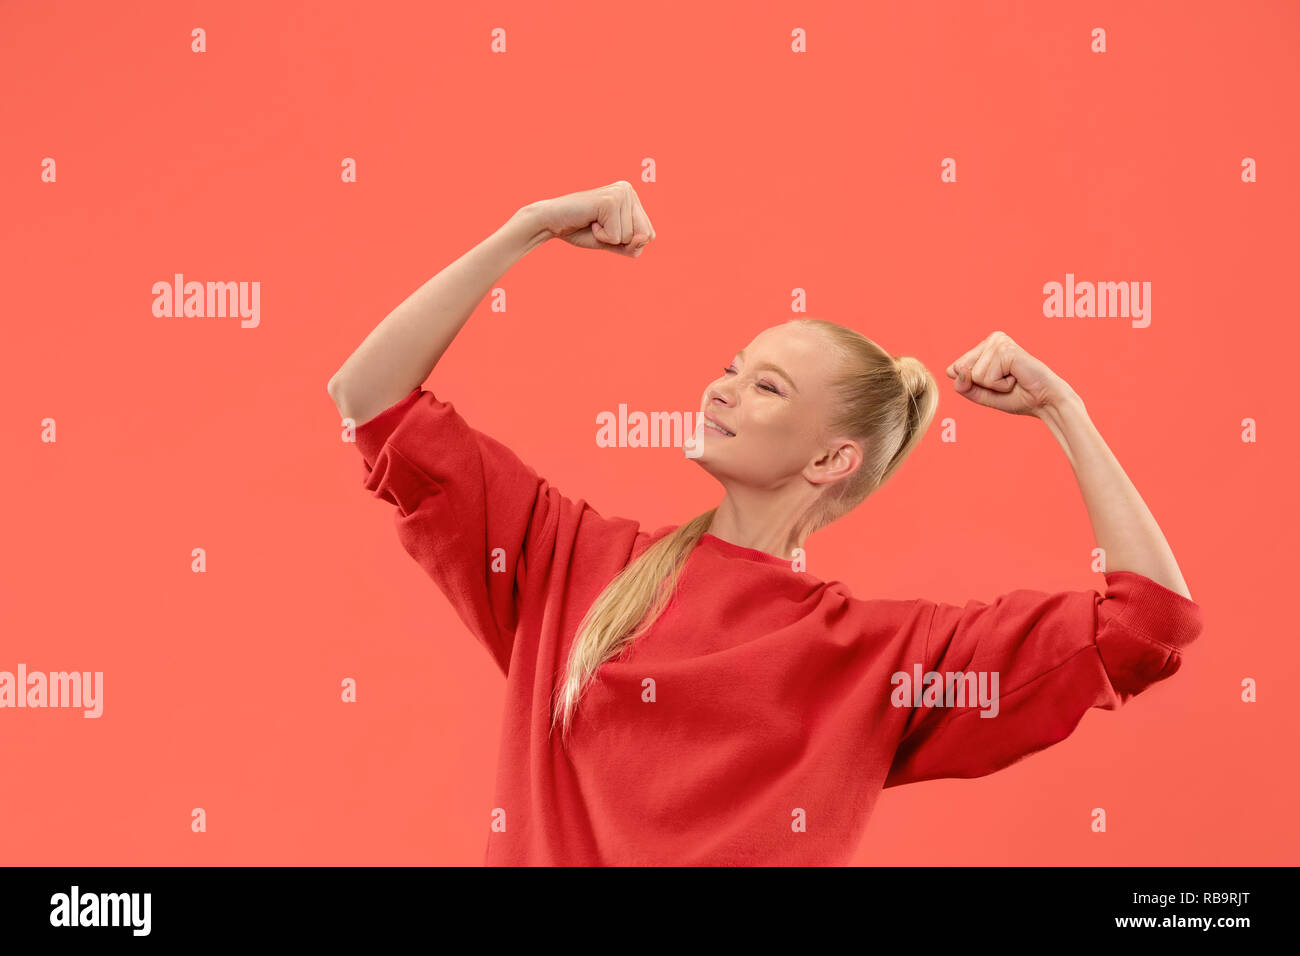 I won. Winning success happy woman celebrating being a winner. Dynamic image of caucasian female model on coral studio background. Victory, delight concept. Human facial emotions concept. Trendy colors Stock Photo